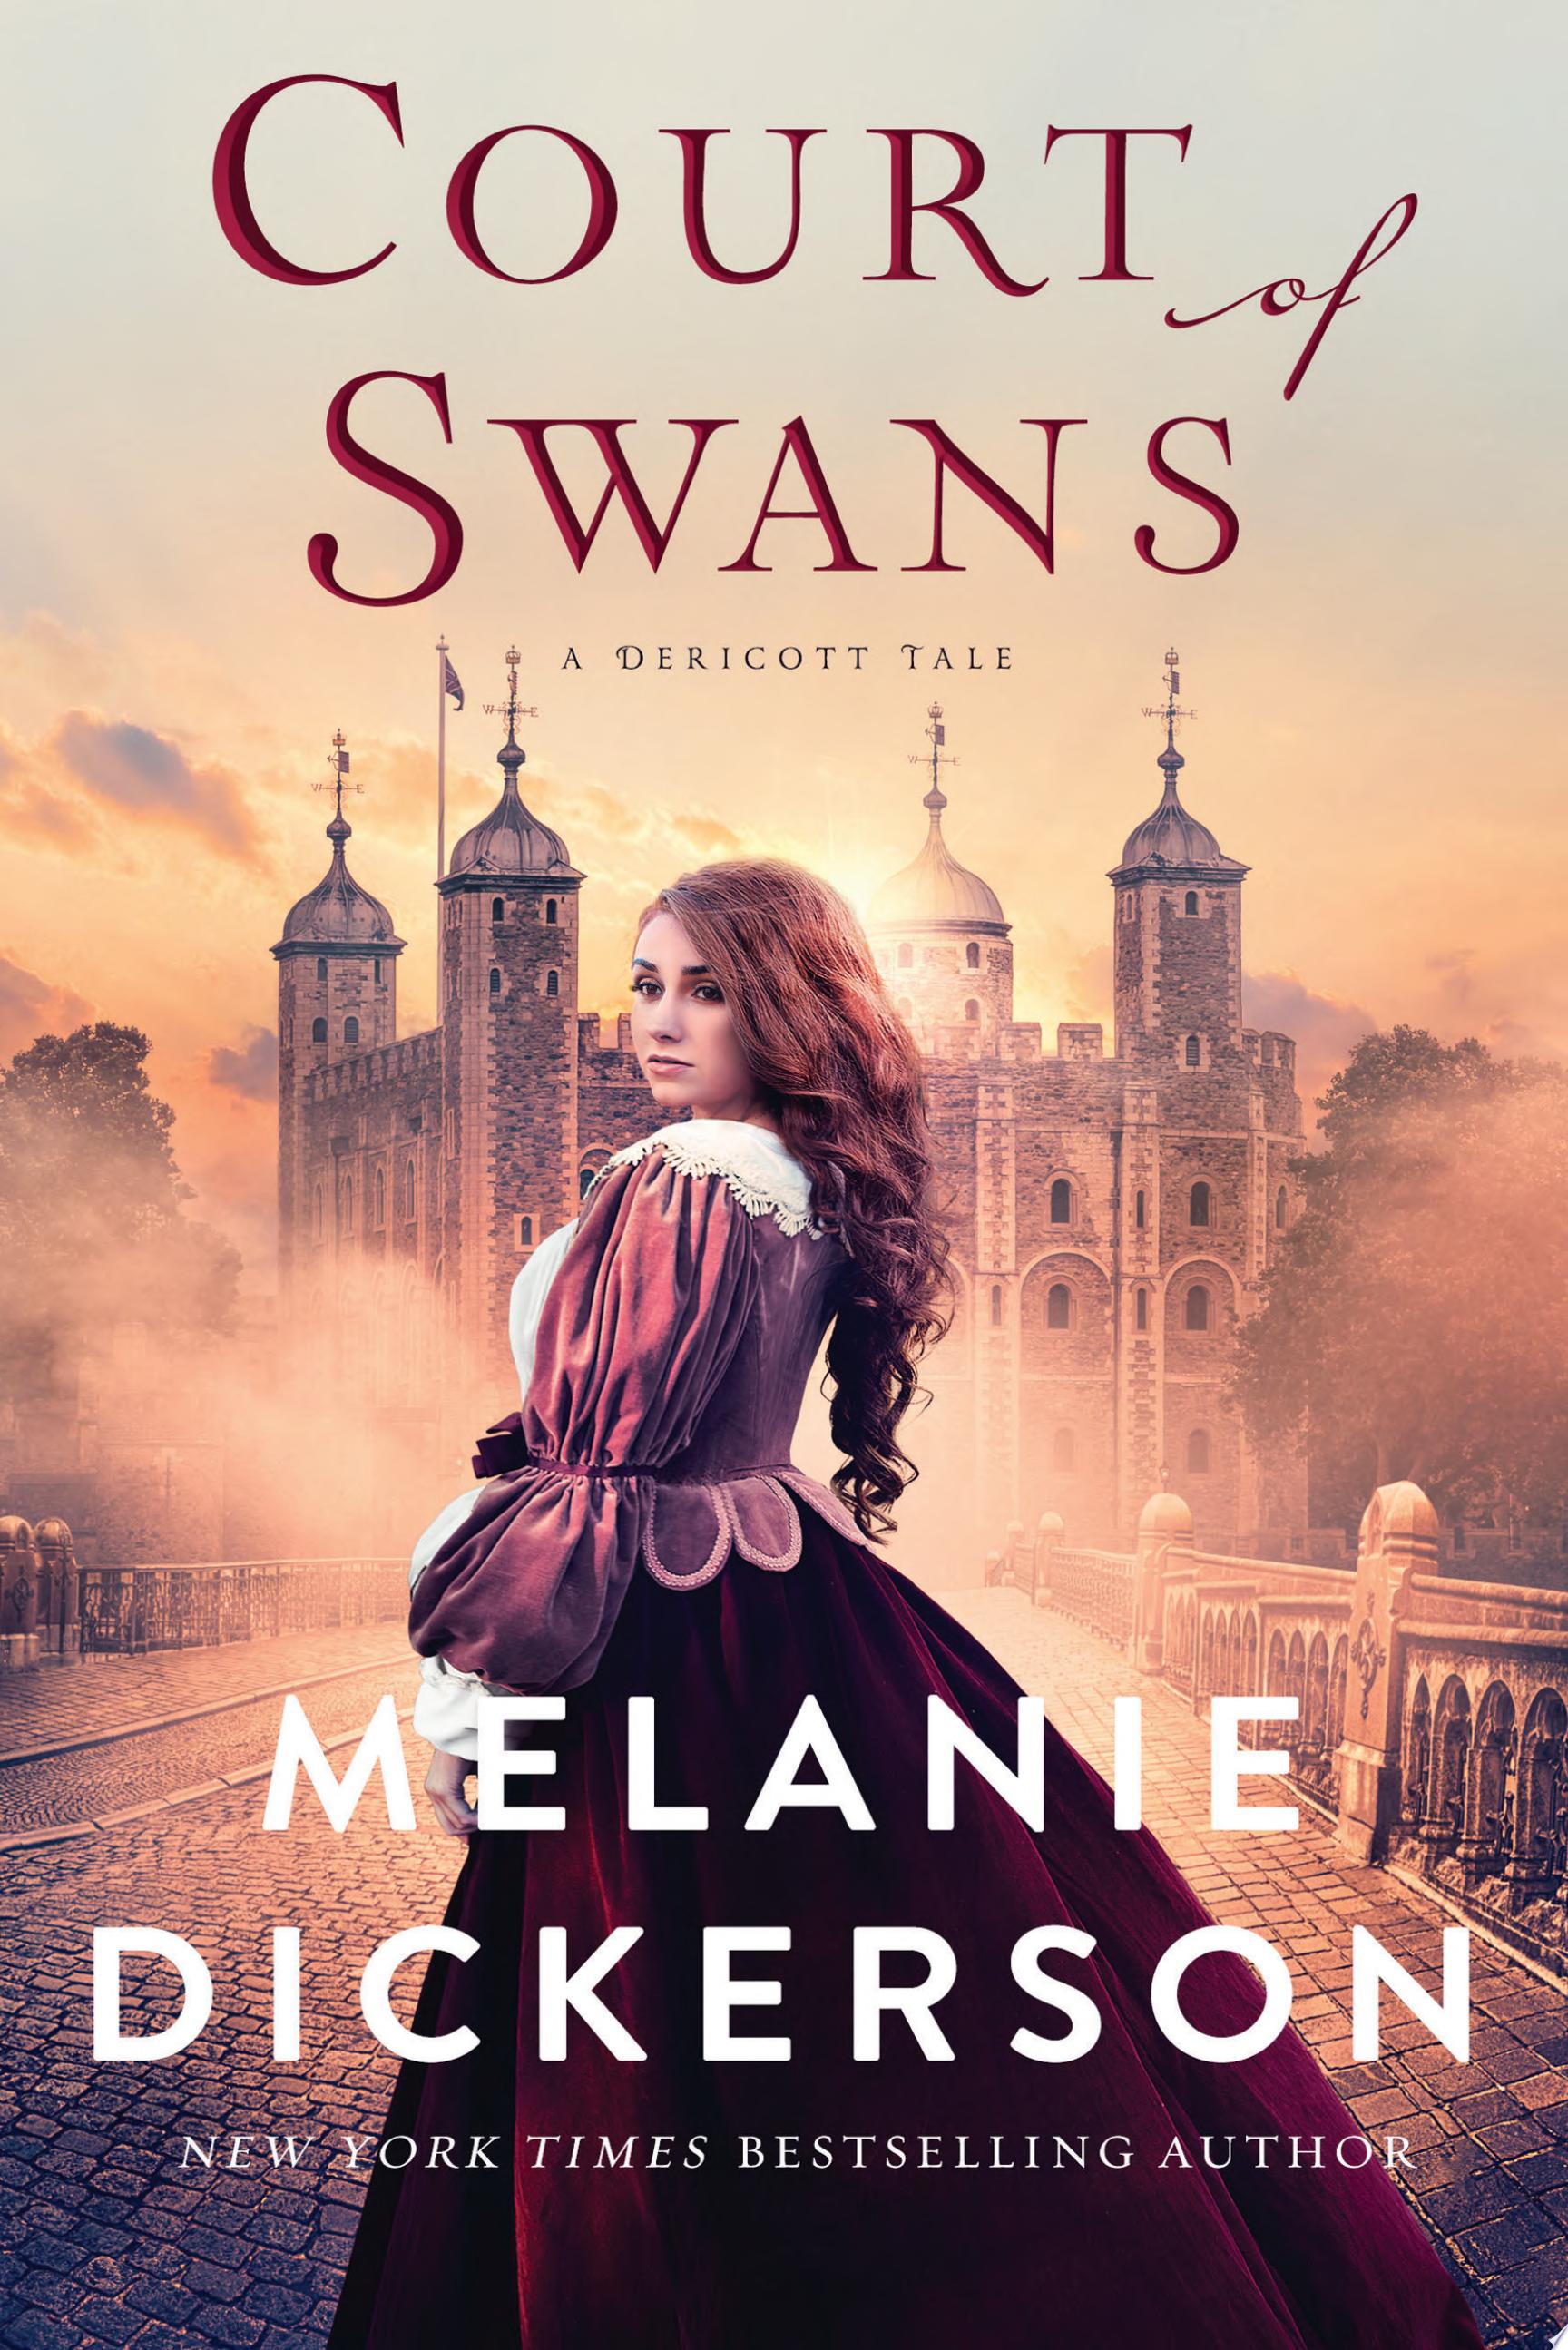 Image for "Court of Swans"